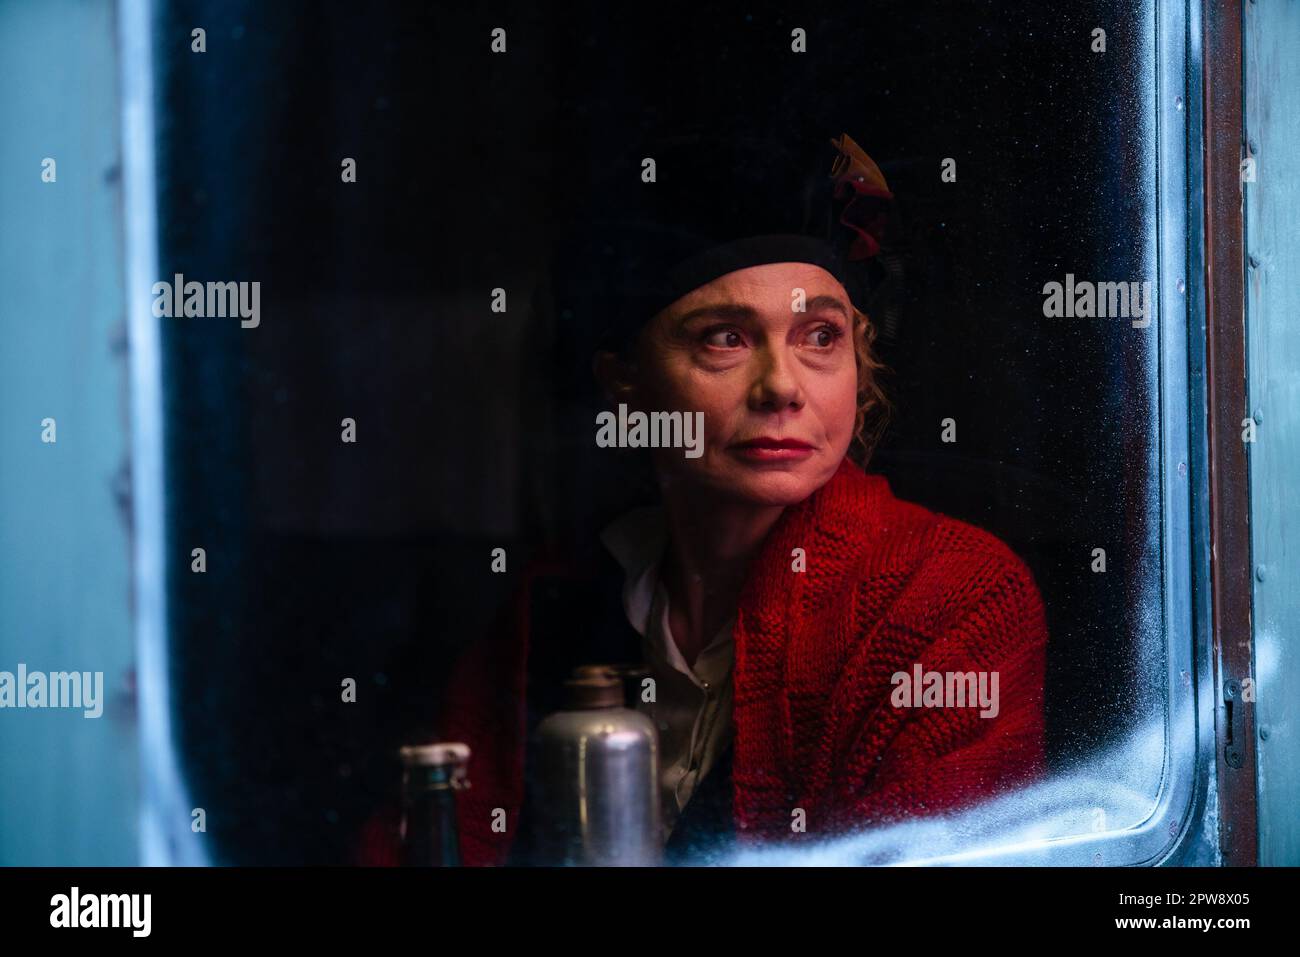 LENA OLIN in HILMA (2022), directed by LASSE HALLSTROM. Credit: Nordic Entertainment Group / Album Stock Photo